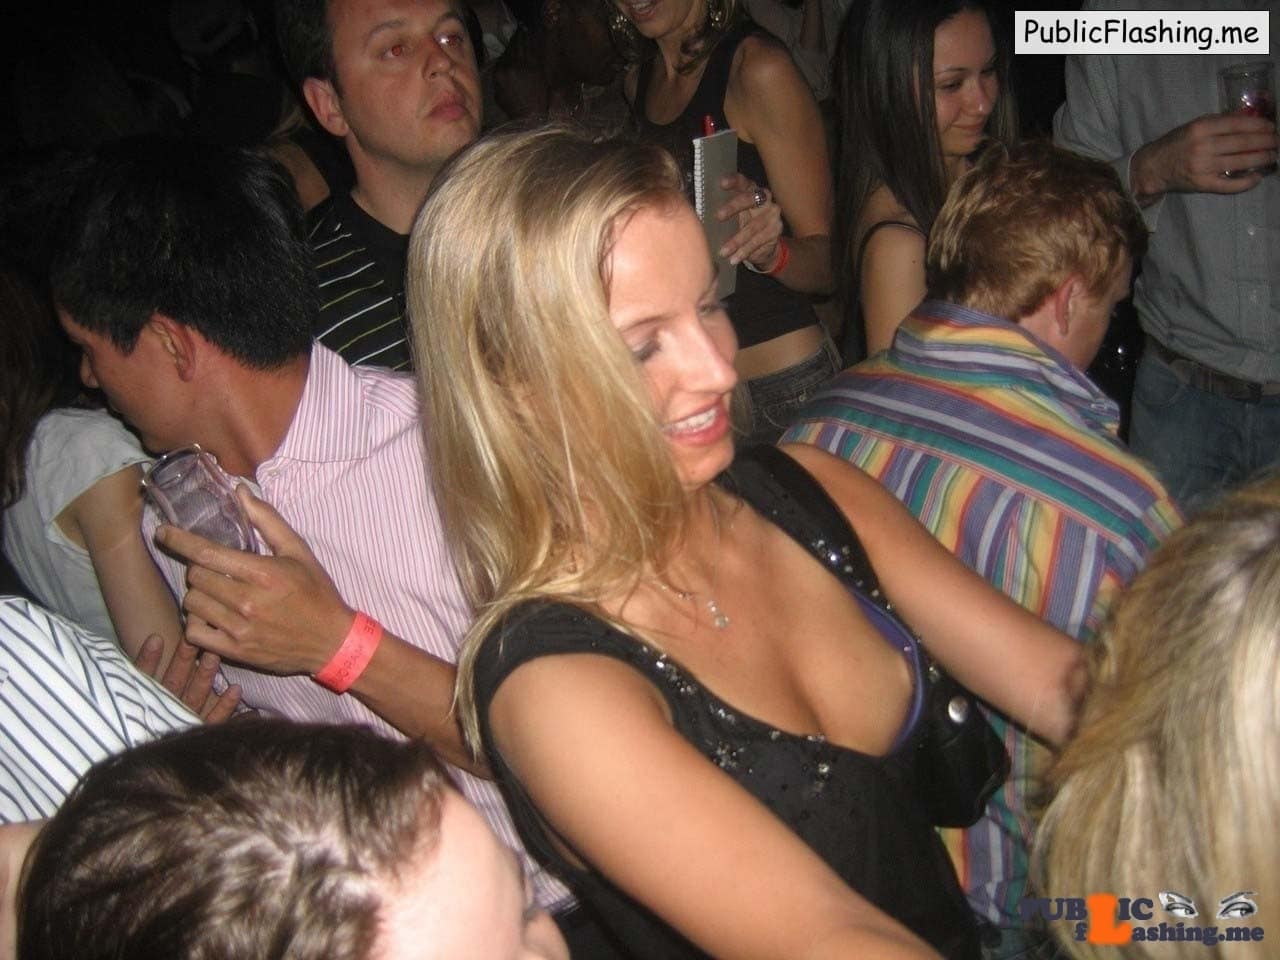 Amateur: Nice nip slip on college party Naughty nipple of beautiful college girl almost caught on a party. Nip slip photos are always interesting to all men and girls and this one was captured accidentally while this cute beauty who looks like Britney...